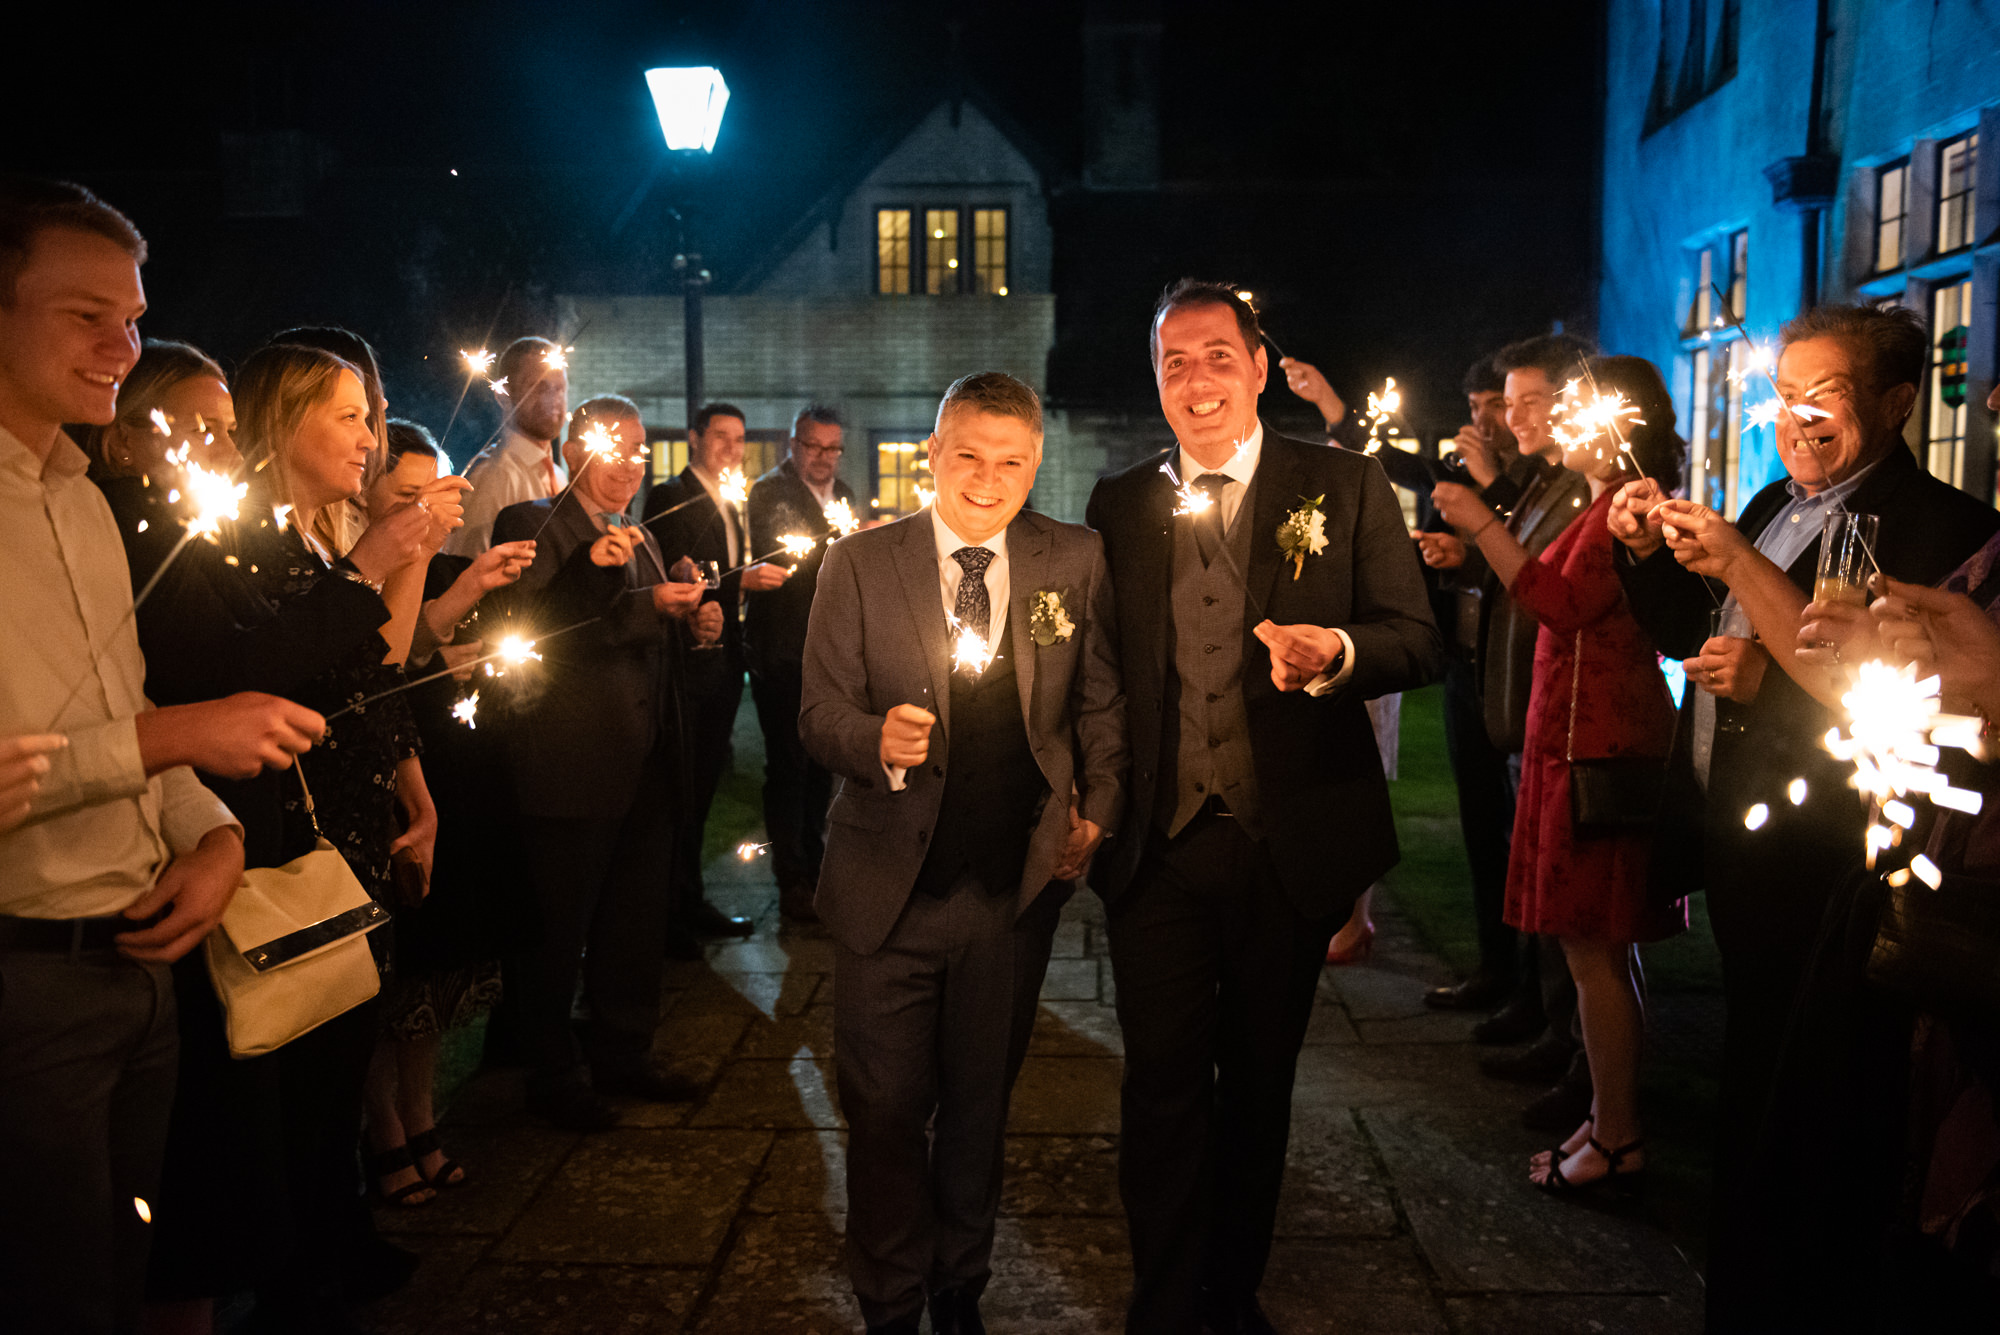 Winter wedding at Pennyhill Park